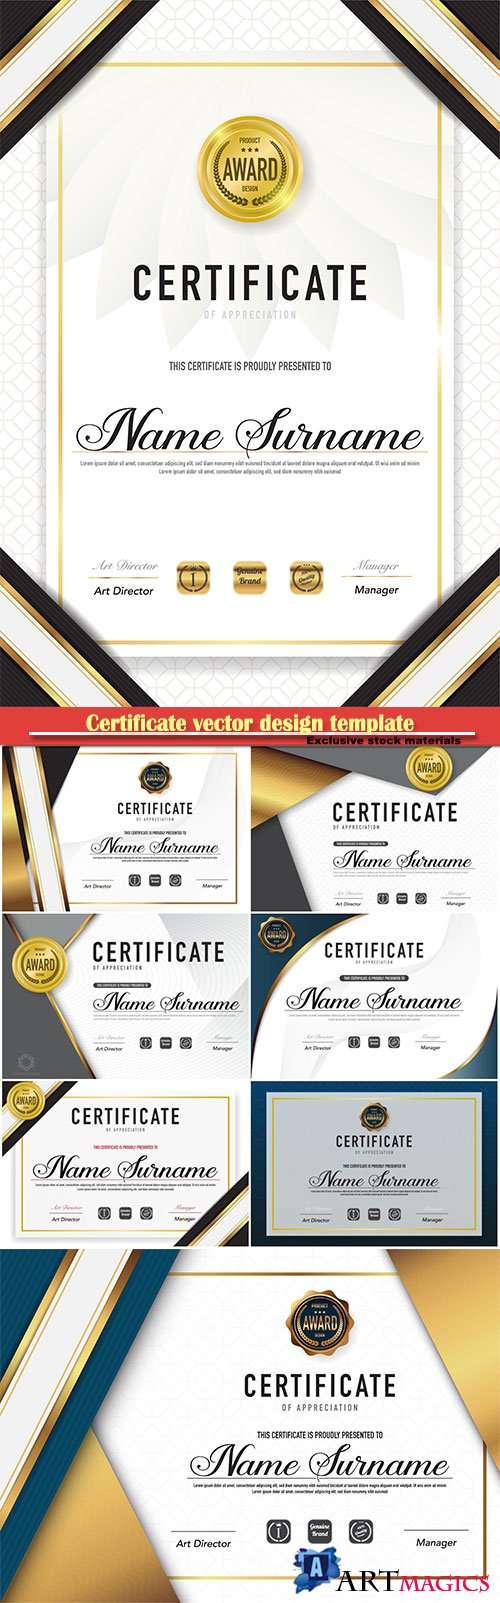 Certificate and vector diploma design template # 51